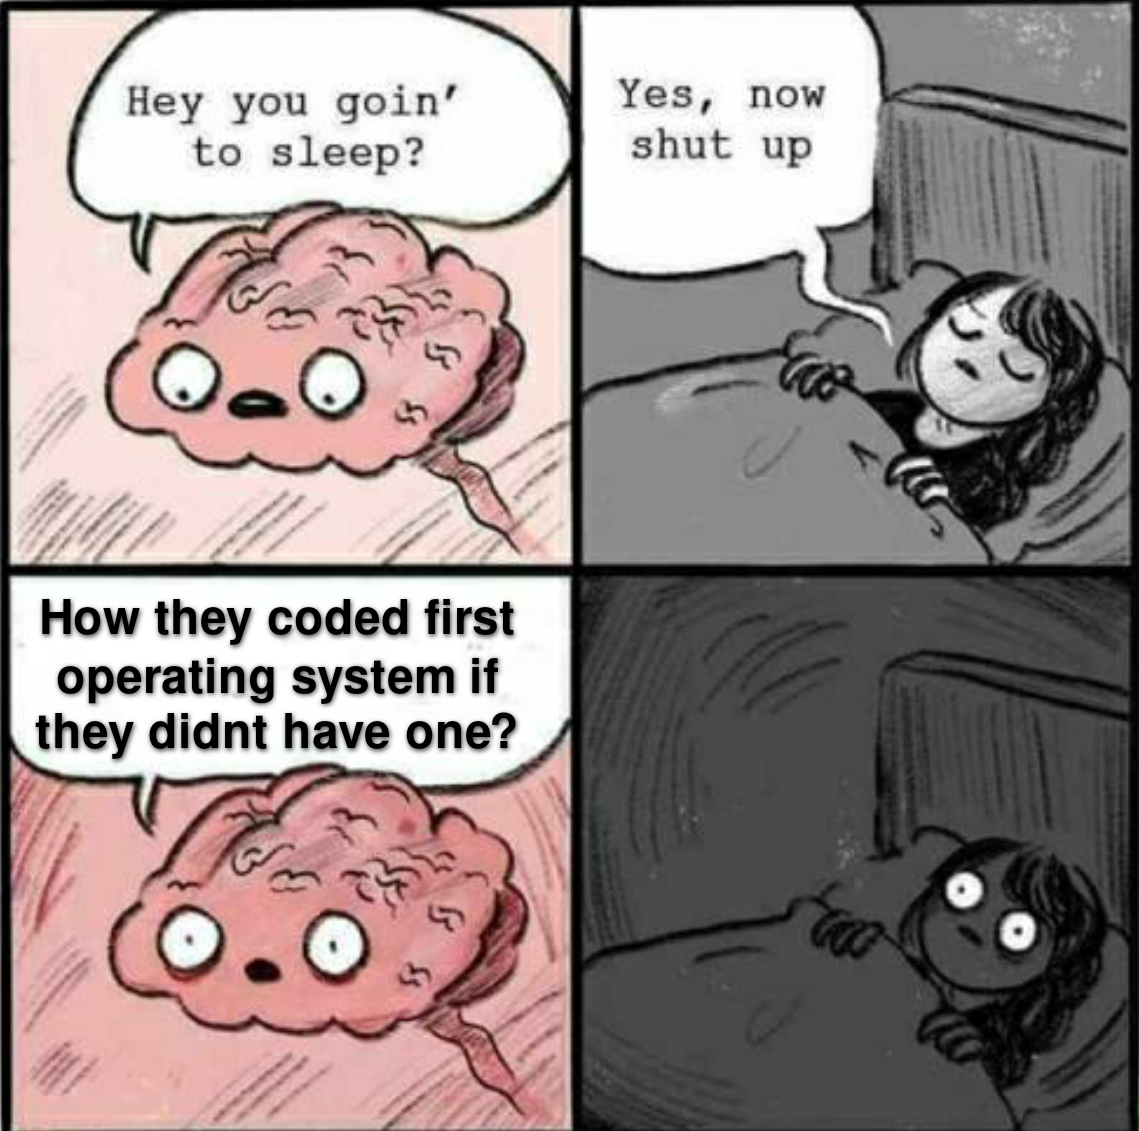 pain hub memes - Hey you goin' to sleep? Yes, now shut up How they coded first operating system if they didnt have one? O